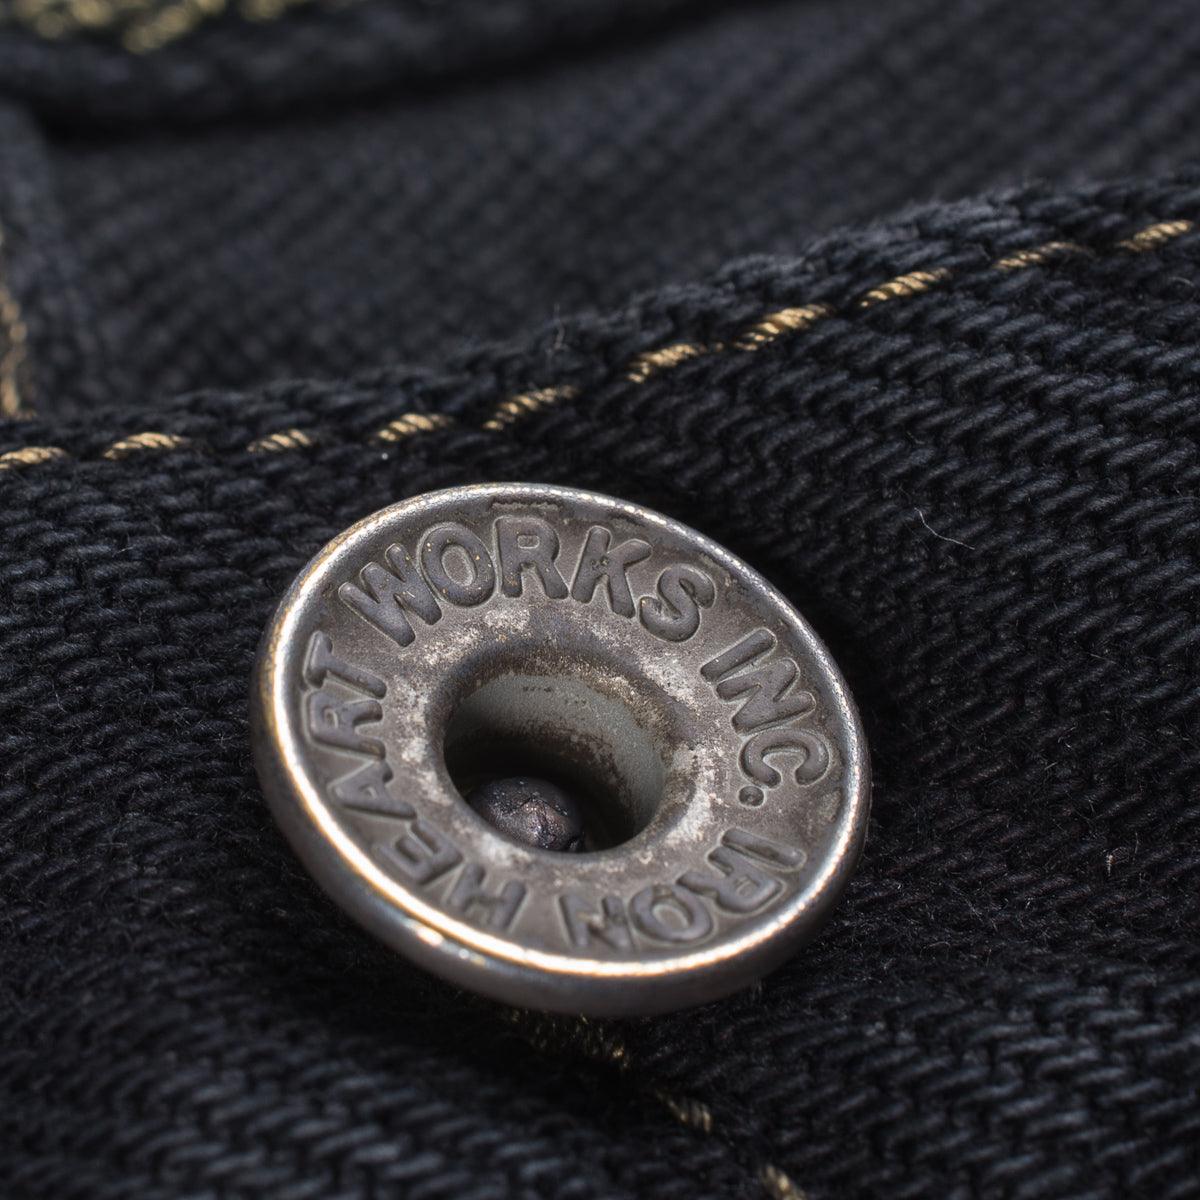 Image showing the IH-888S-OD - 21 oz Selvedge Denim Tapered Jeans Black Overdyed which is a Jeans described by the following info 888, Bottoms, Iron Heart, Jeans, New, Released, Tappered and sold on the IRON HEART GERMANY online store